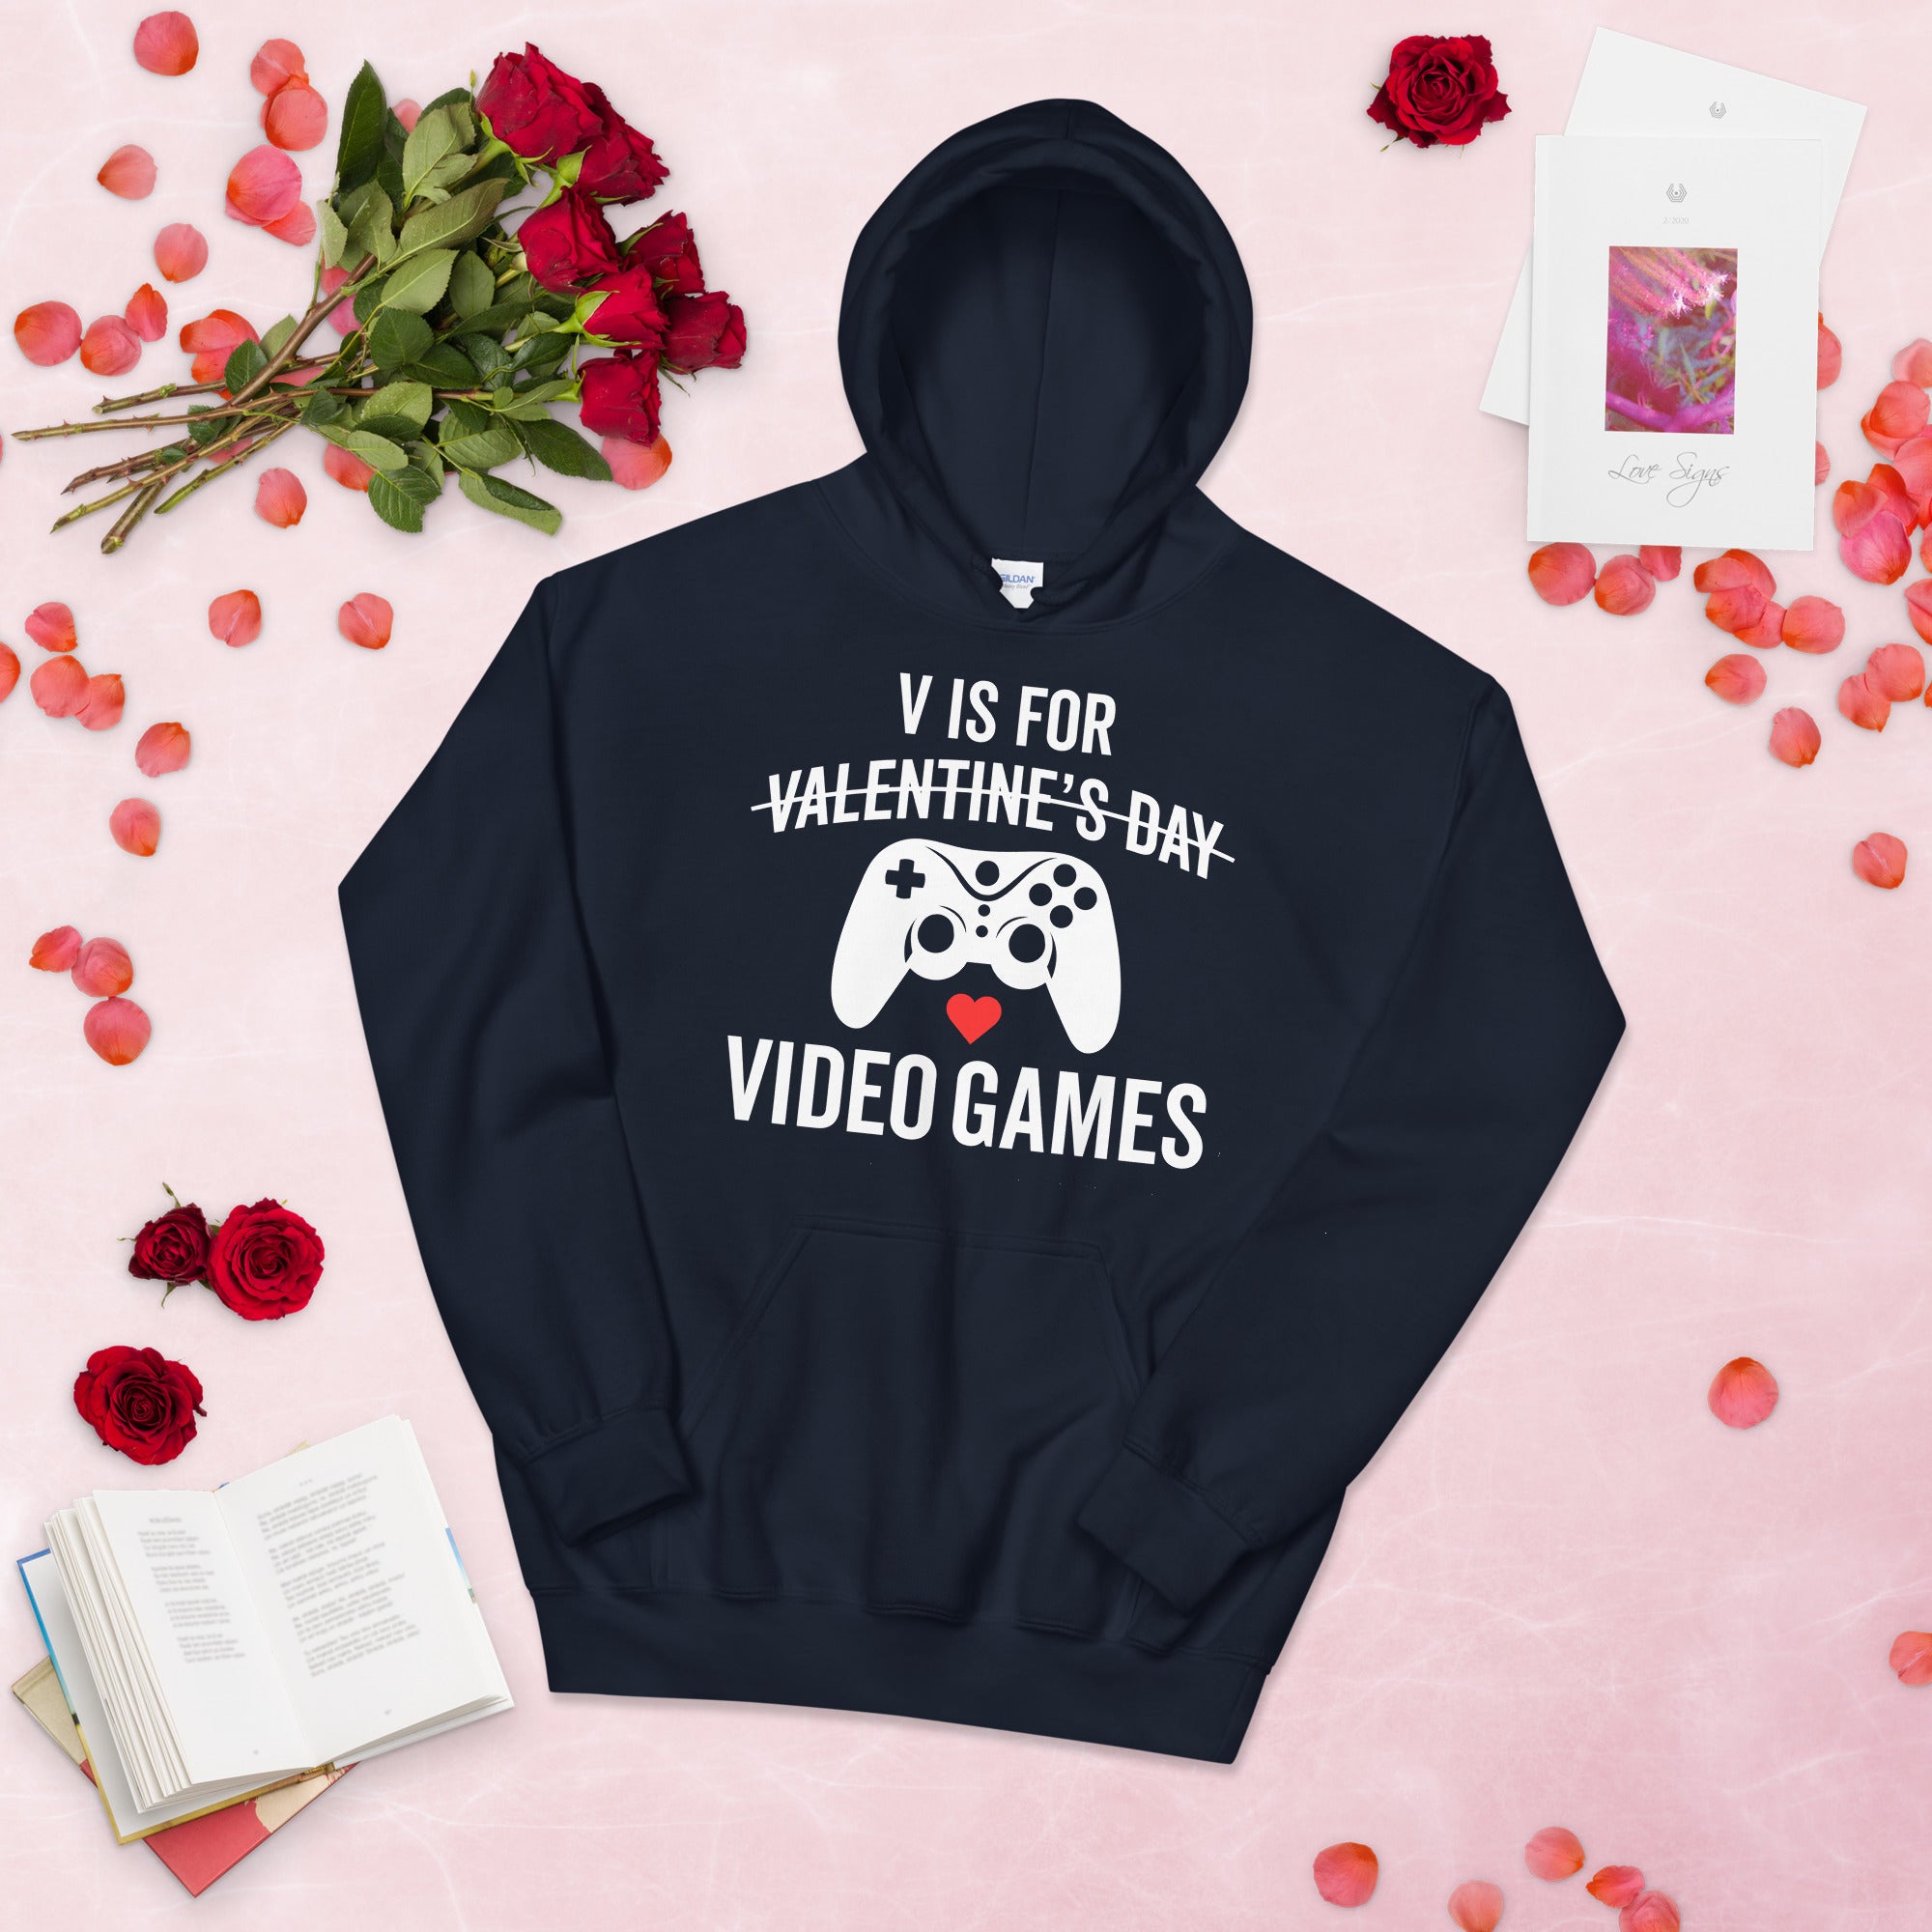 V Is For Video Games Hoodie, Video Game Shirt, Gift For Gamer, Funny Boyfriend Gift, Gaming Hoodie, Funny Gaming Shirts, Gamer Boyfriend - Madeinsea©